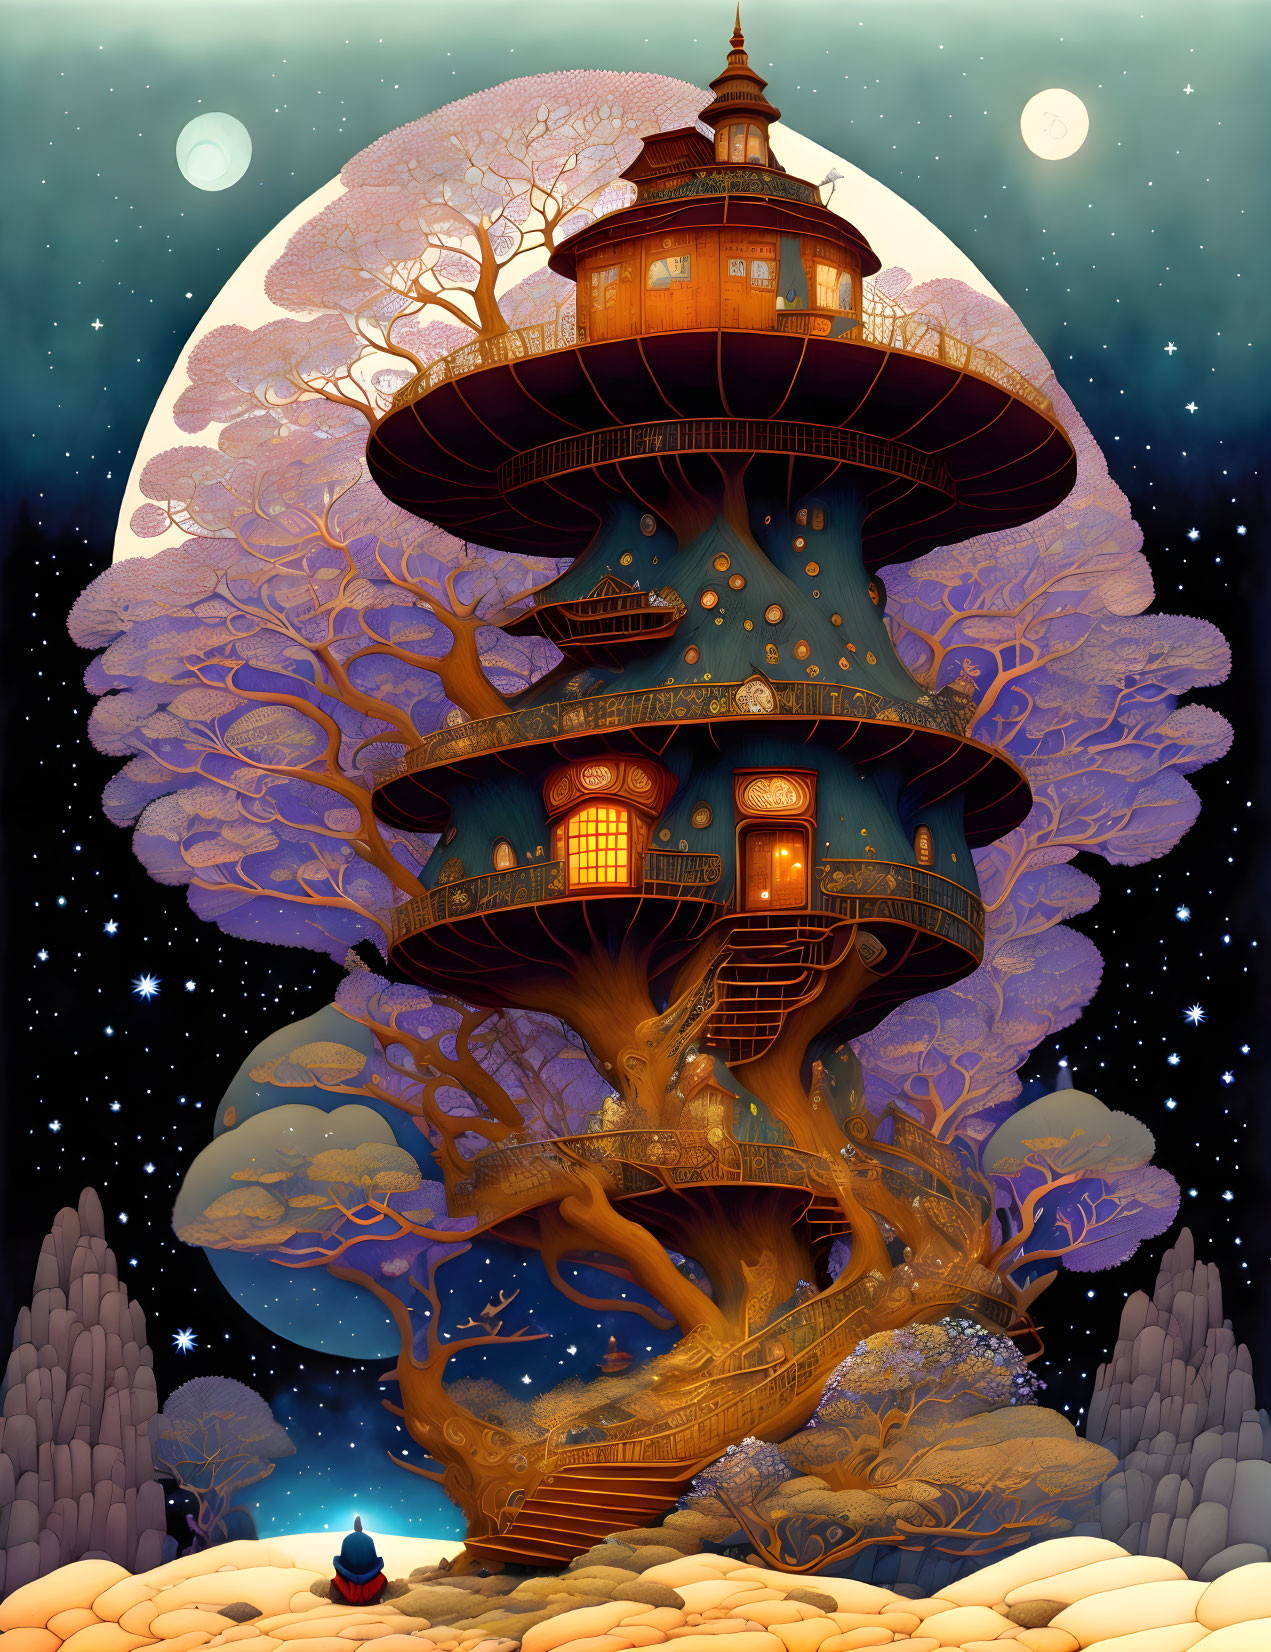 Monk meditates near the magnificent tree house